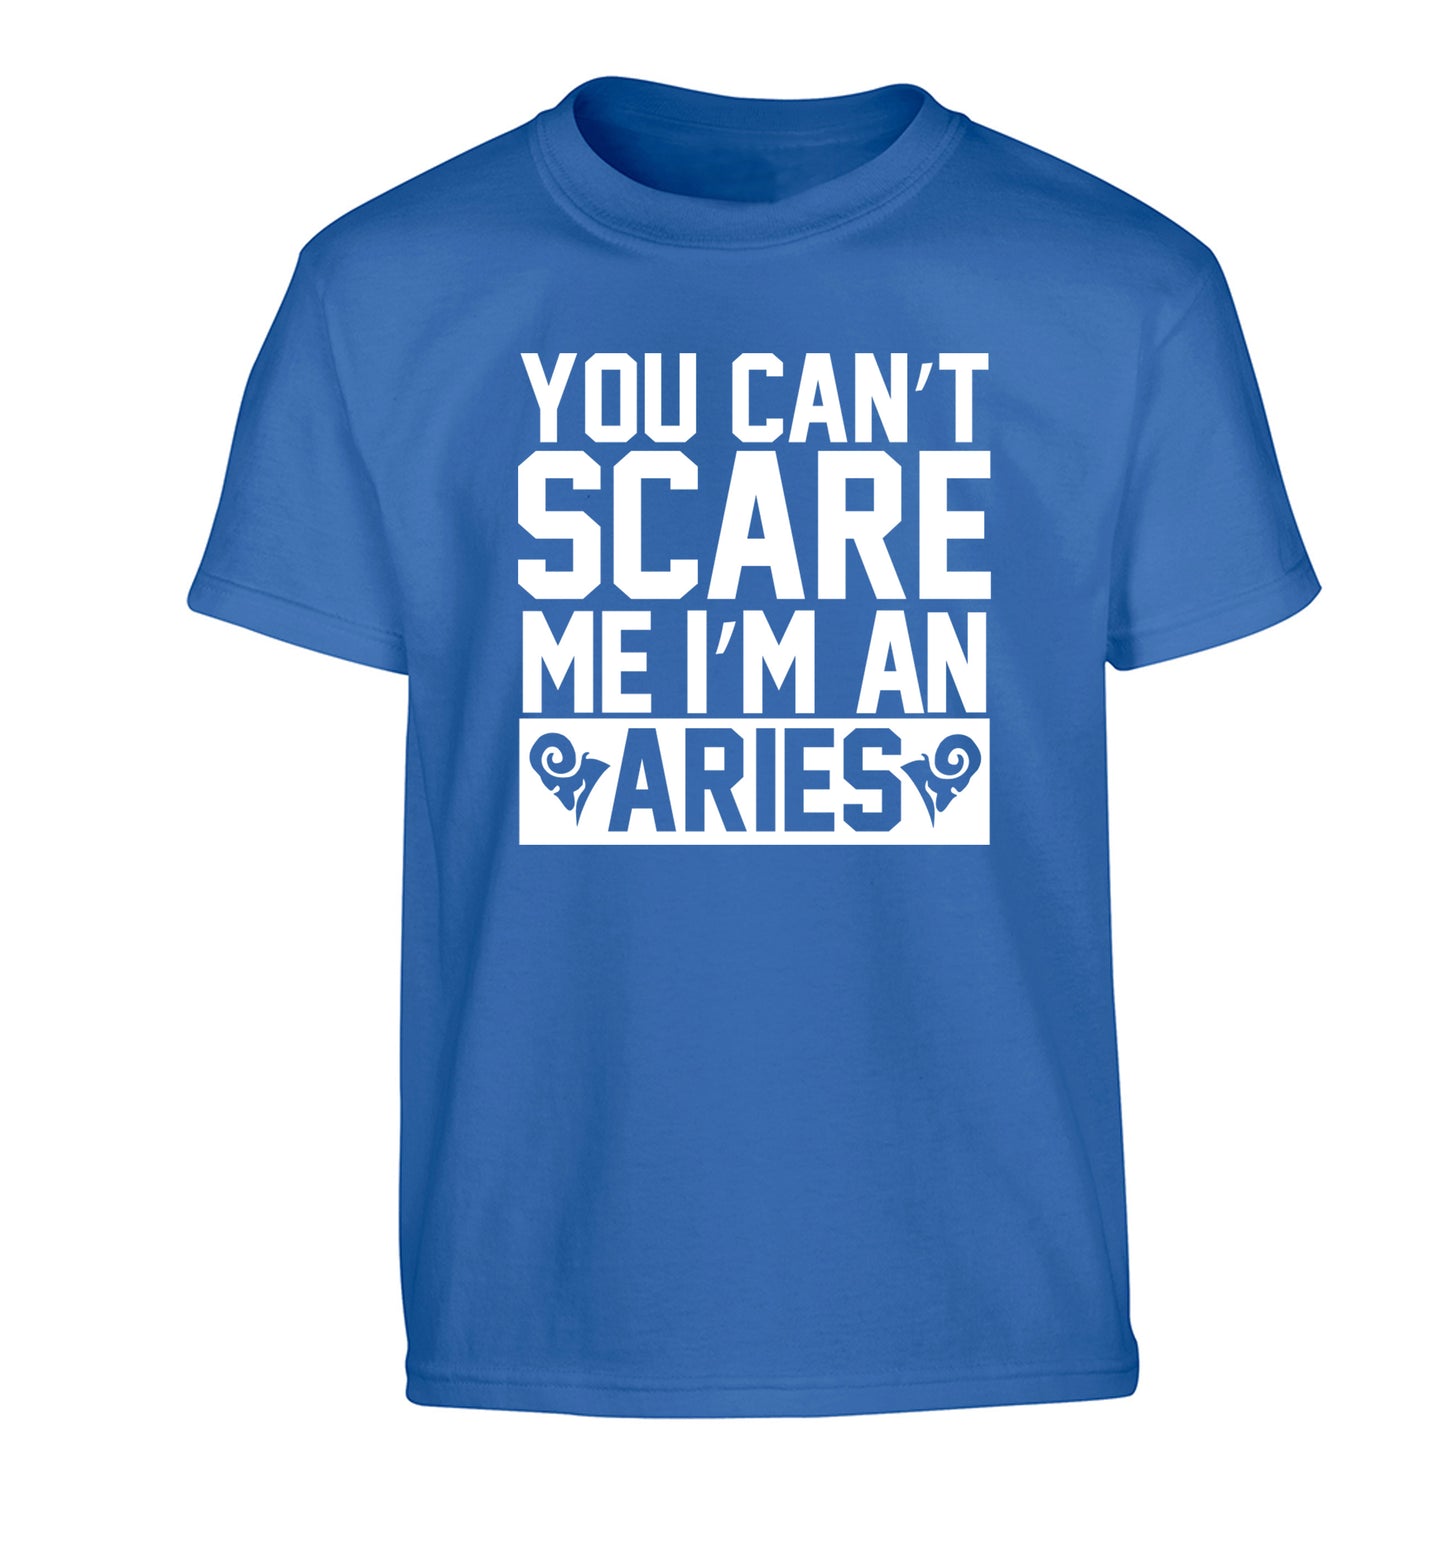 You can't scare me I'm an aries Children's blue Tshirt 12-13 Years